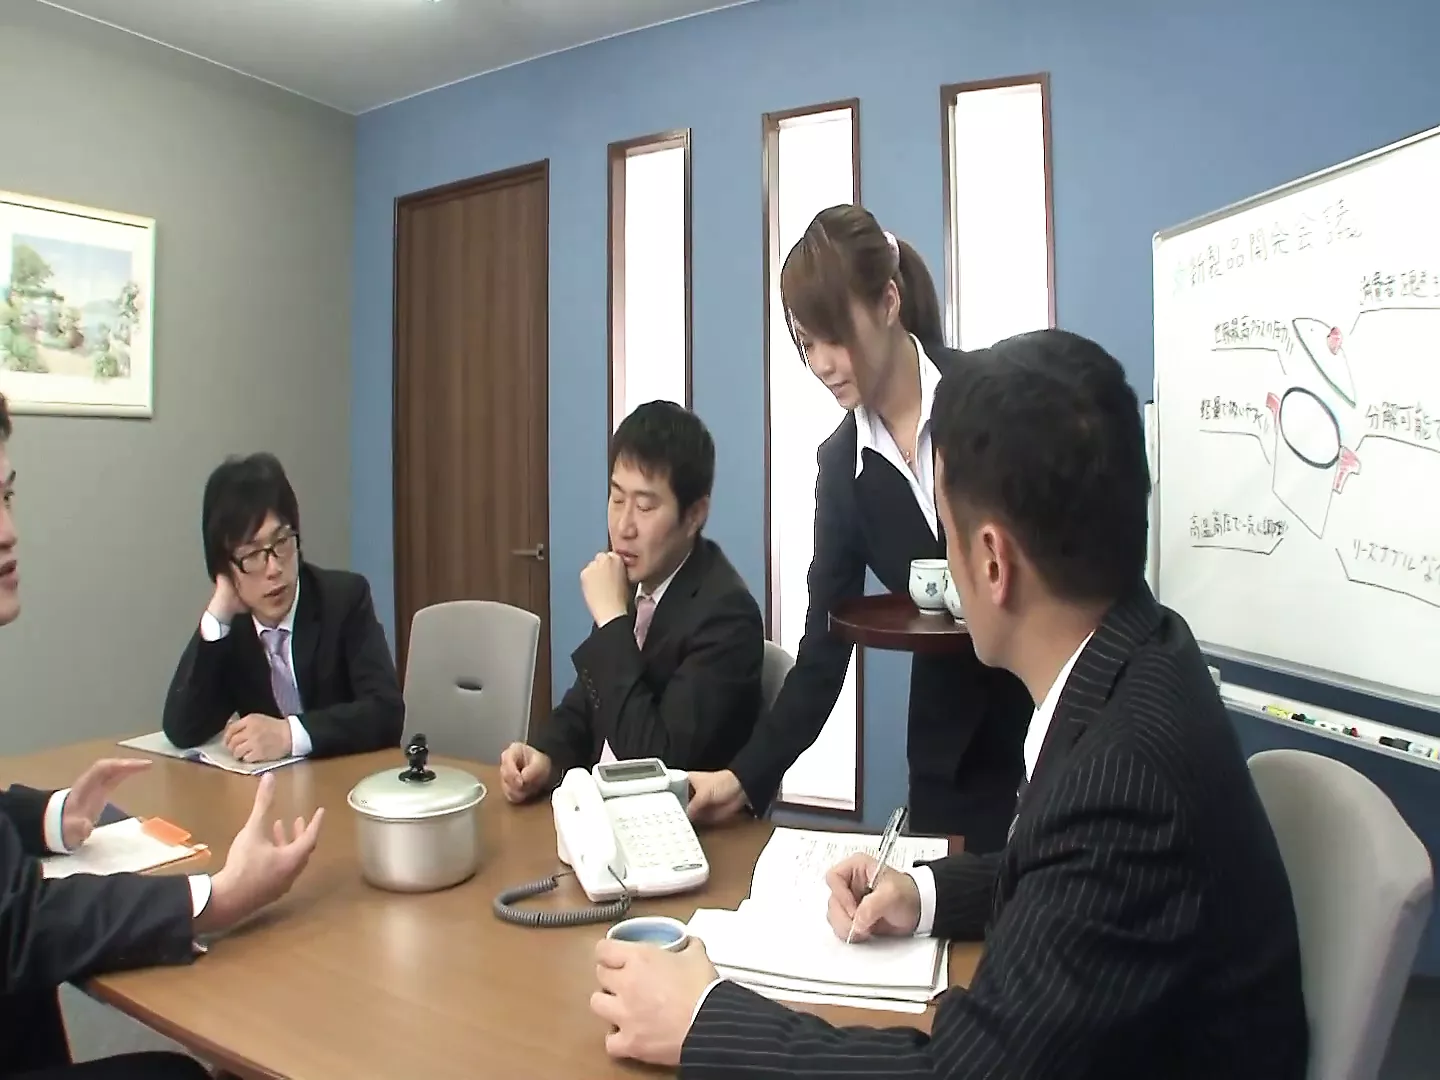 Japanese Office Threesome Porn - Japanese Threesome in the Office, Free HD Porn 1c | xHamster